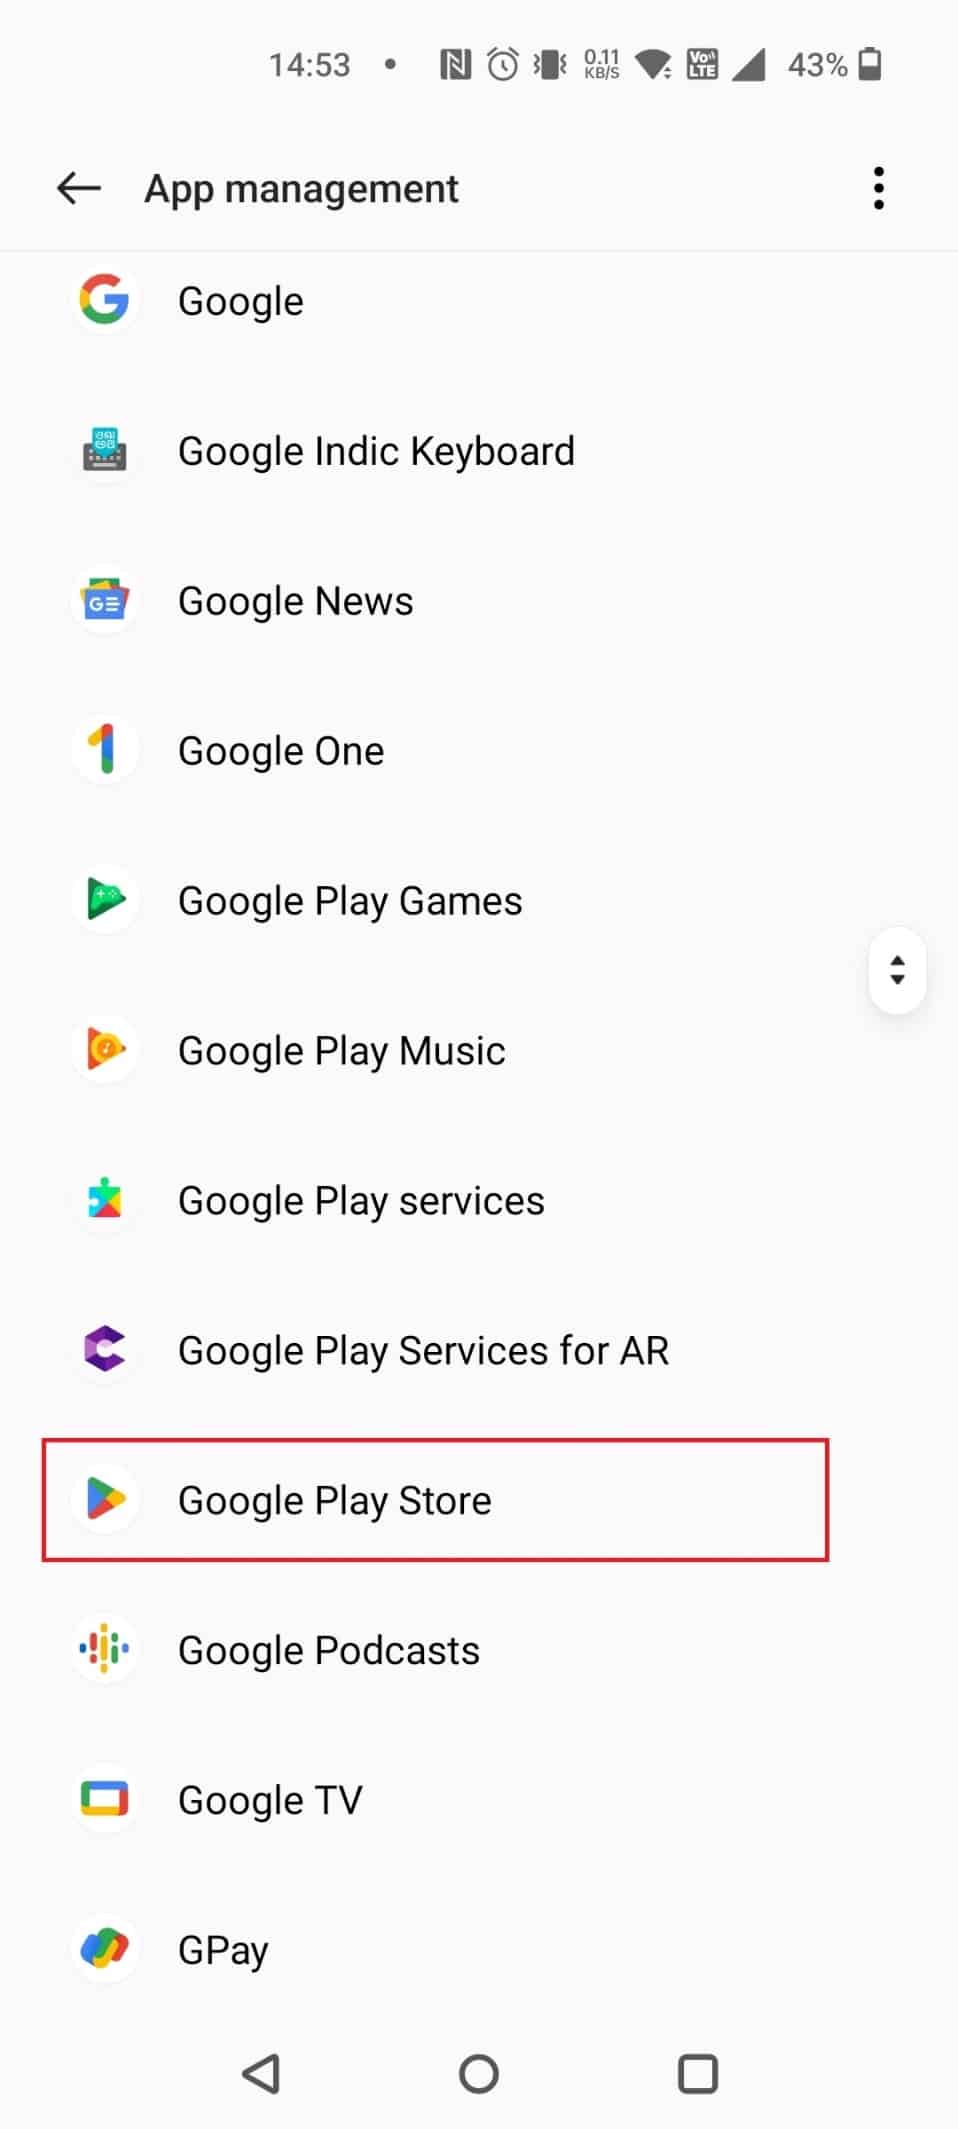 Choose Google Play Store | How to Disable MMGuardian without Parents Knowing | can MMGuardian see incognito mode